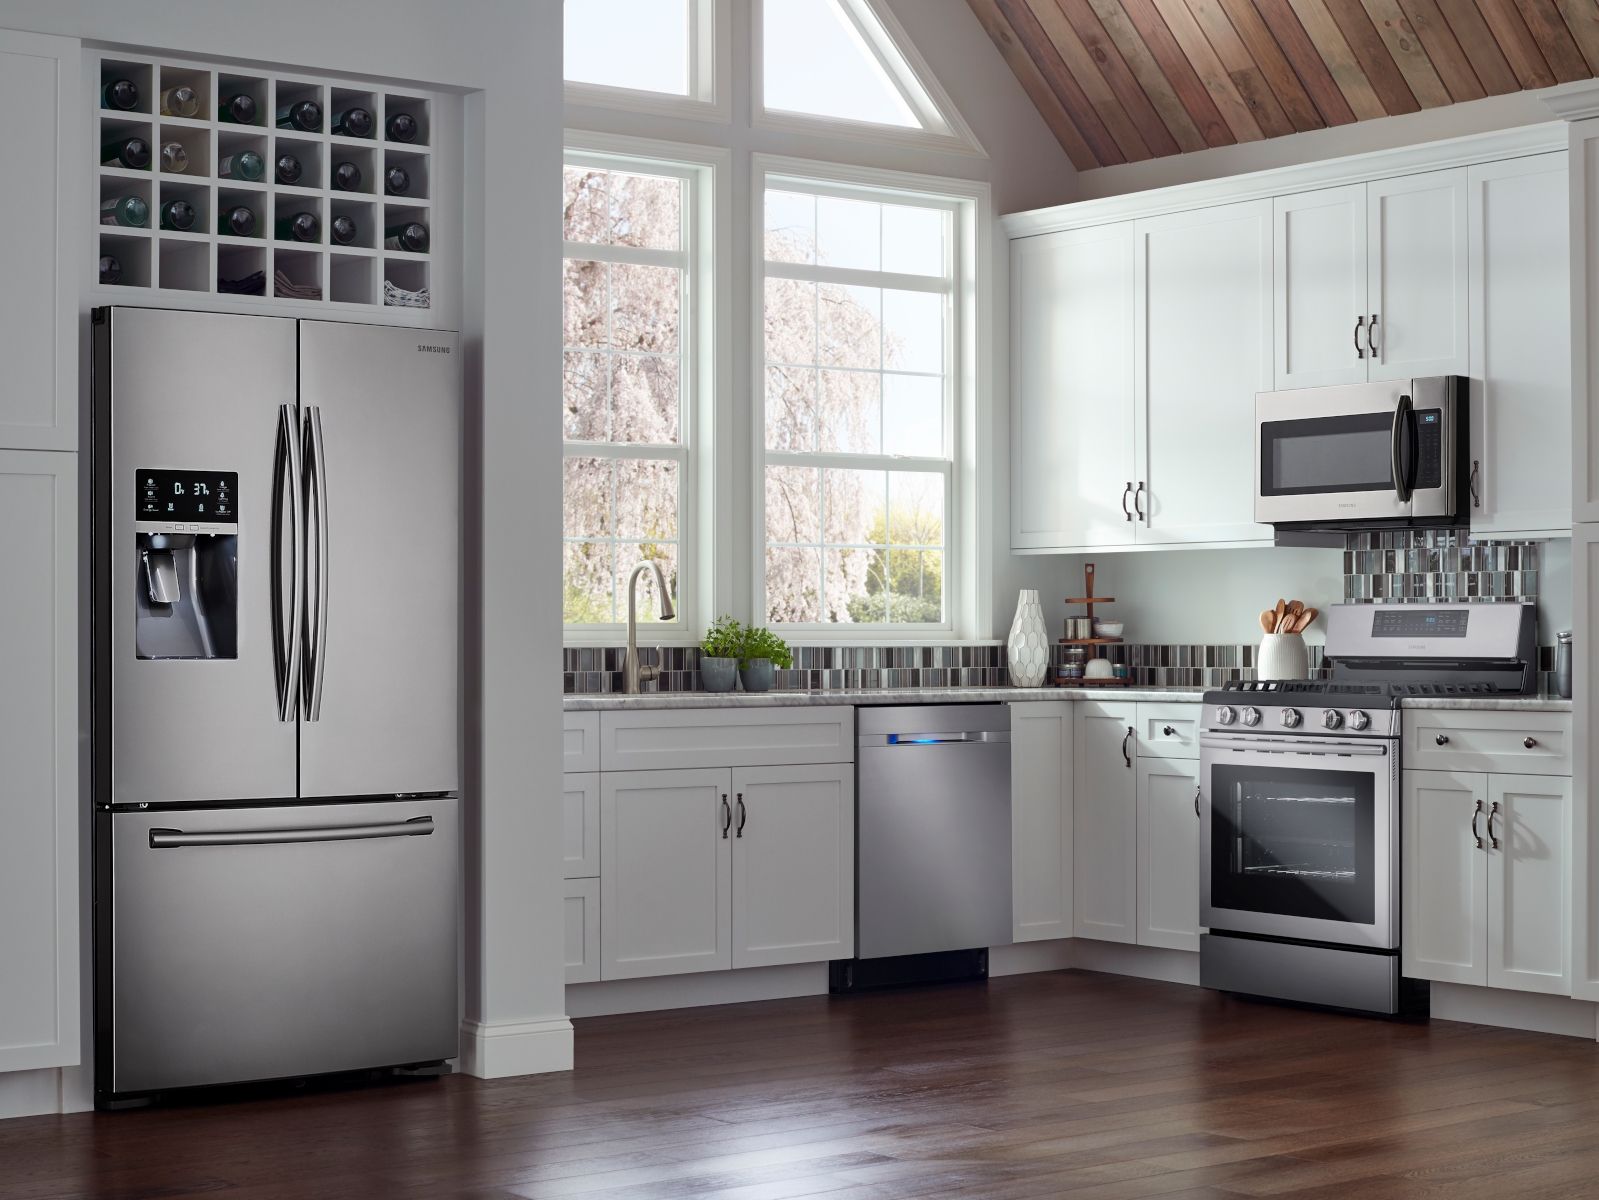 https://image-us.samsung.com/SamsungUS/home/home-appliances/refrigerators/french-doors/pdp/rf28hfedbsr/gallery/08_Refrigerator_French-Door_RF28HFEDBSR_LIfestyle_Kitchen_Closed_Silver.jpg?$product-details-jpg$